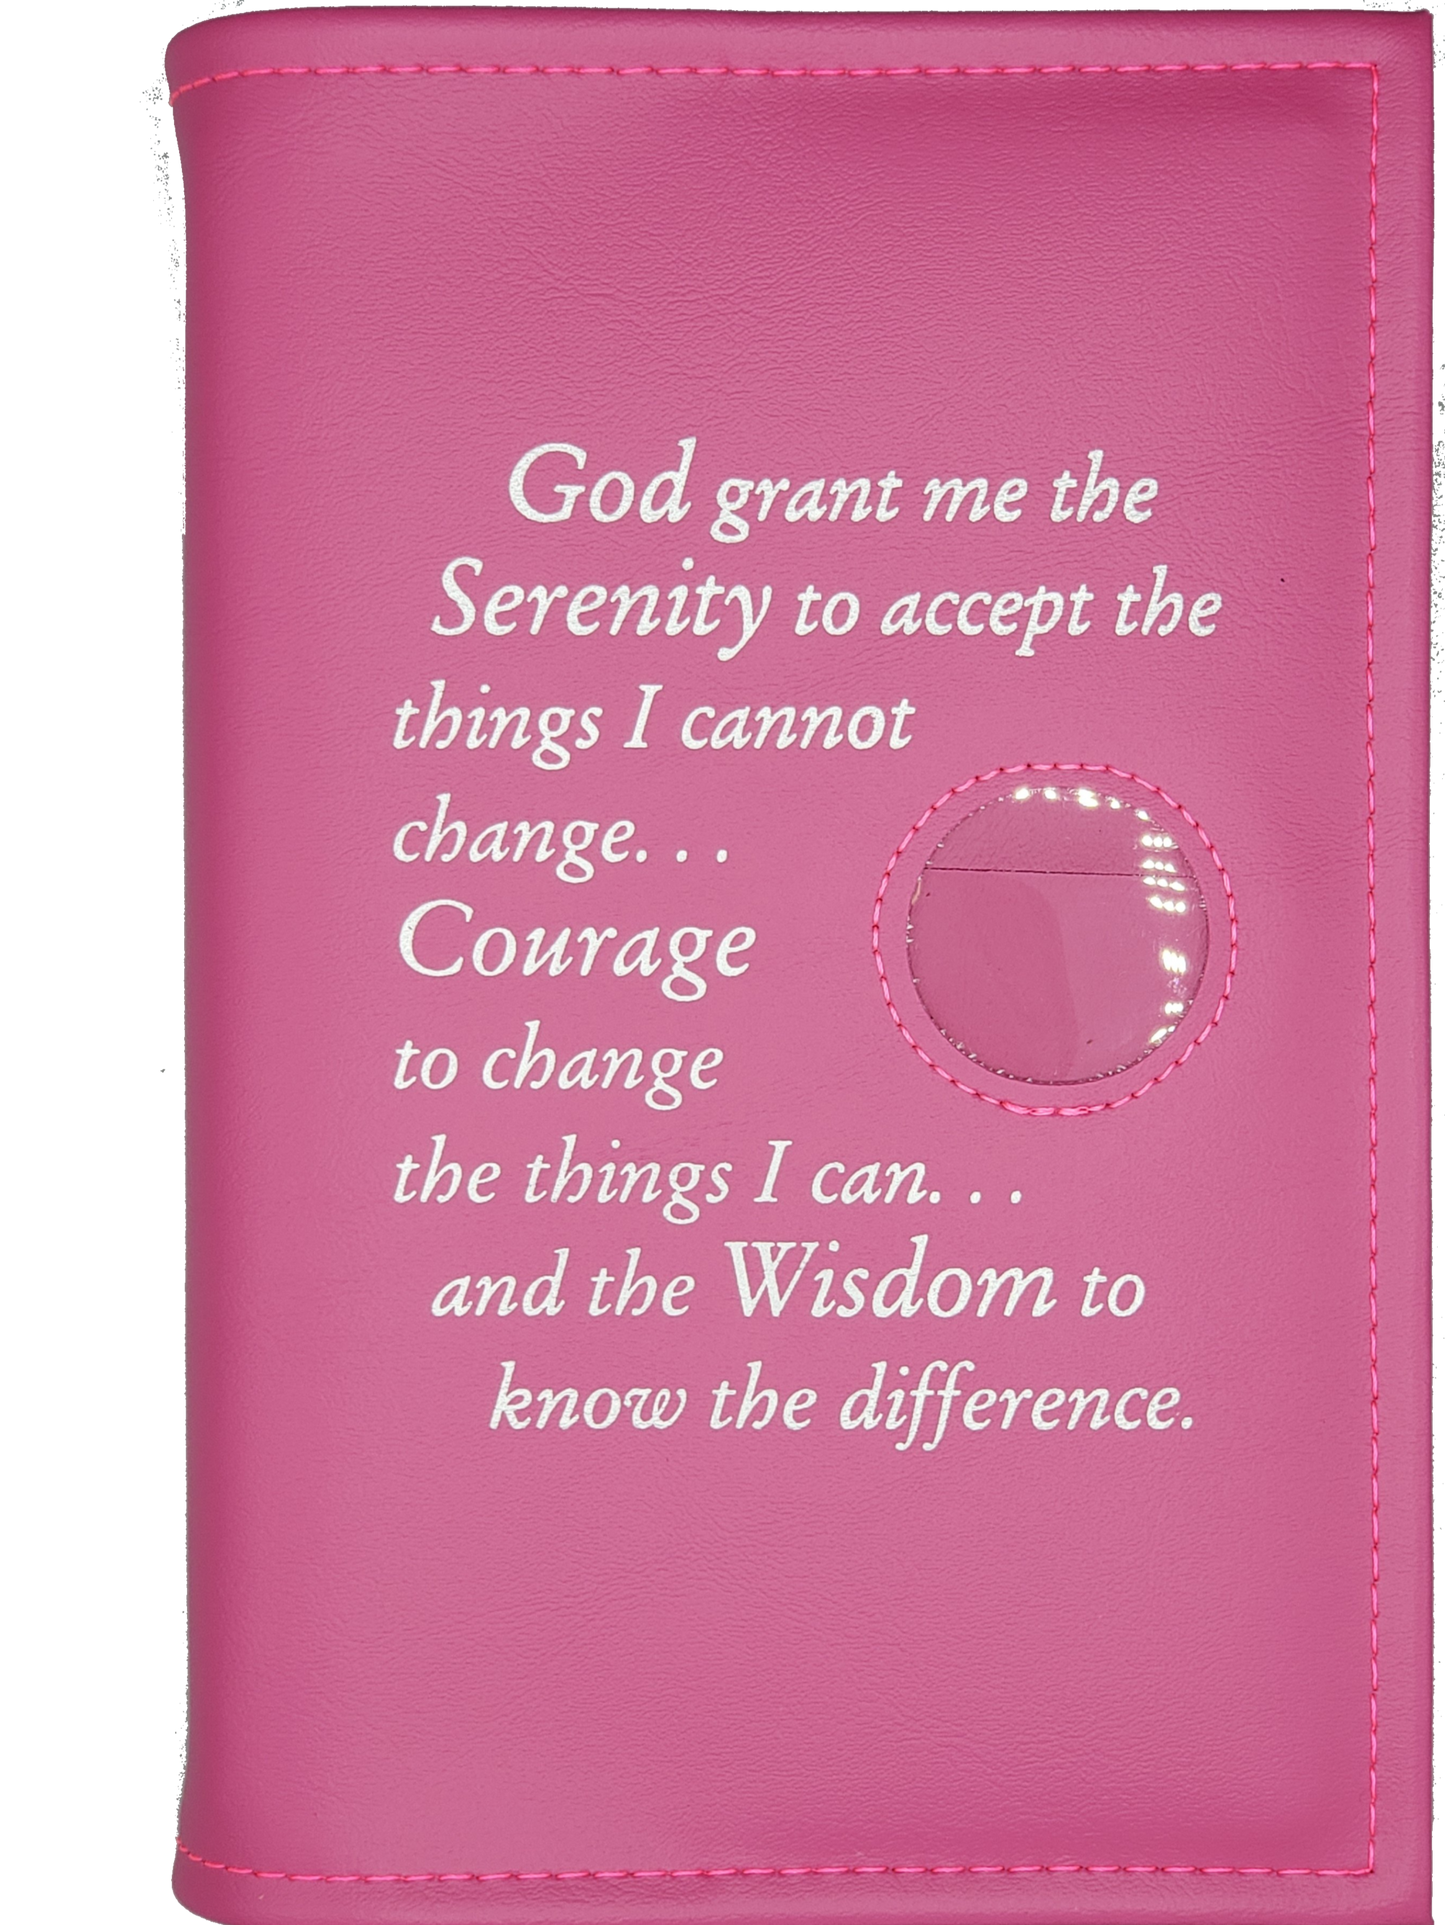 AA Single Book Cover for AA Hardcovers w/Serenity Prayer & Medallion Slot